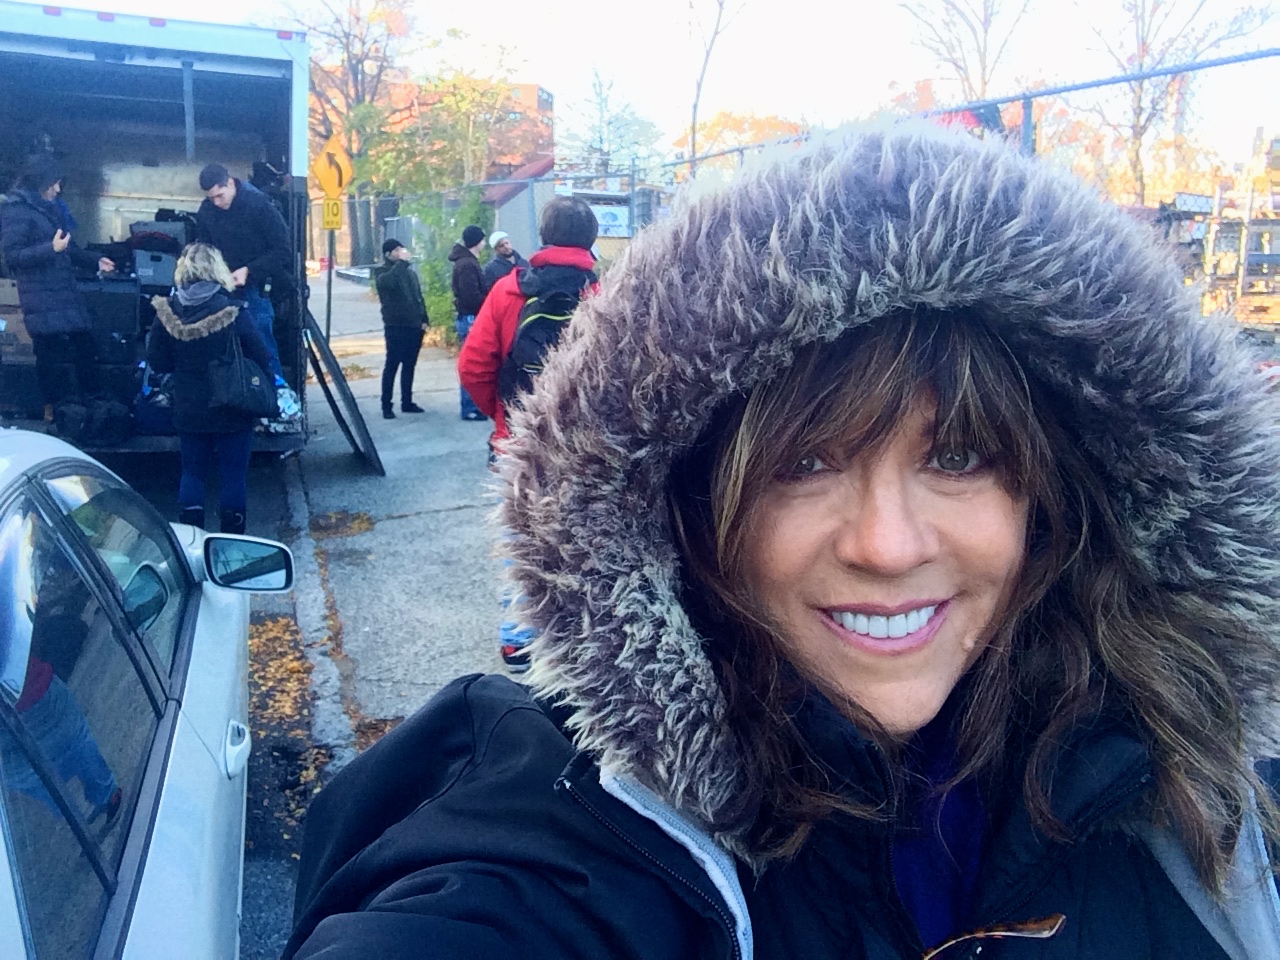 Shooting a film on chilly Astoria day.